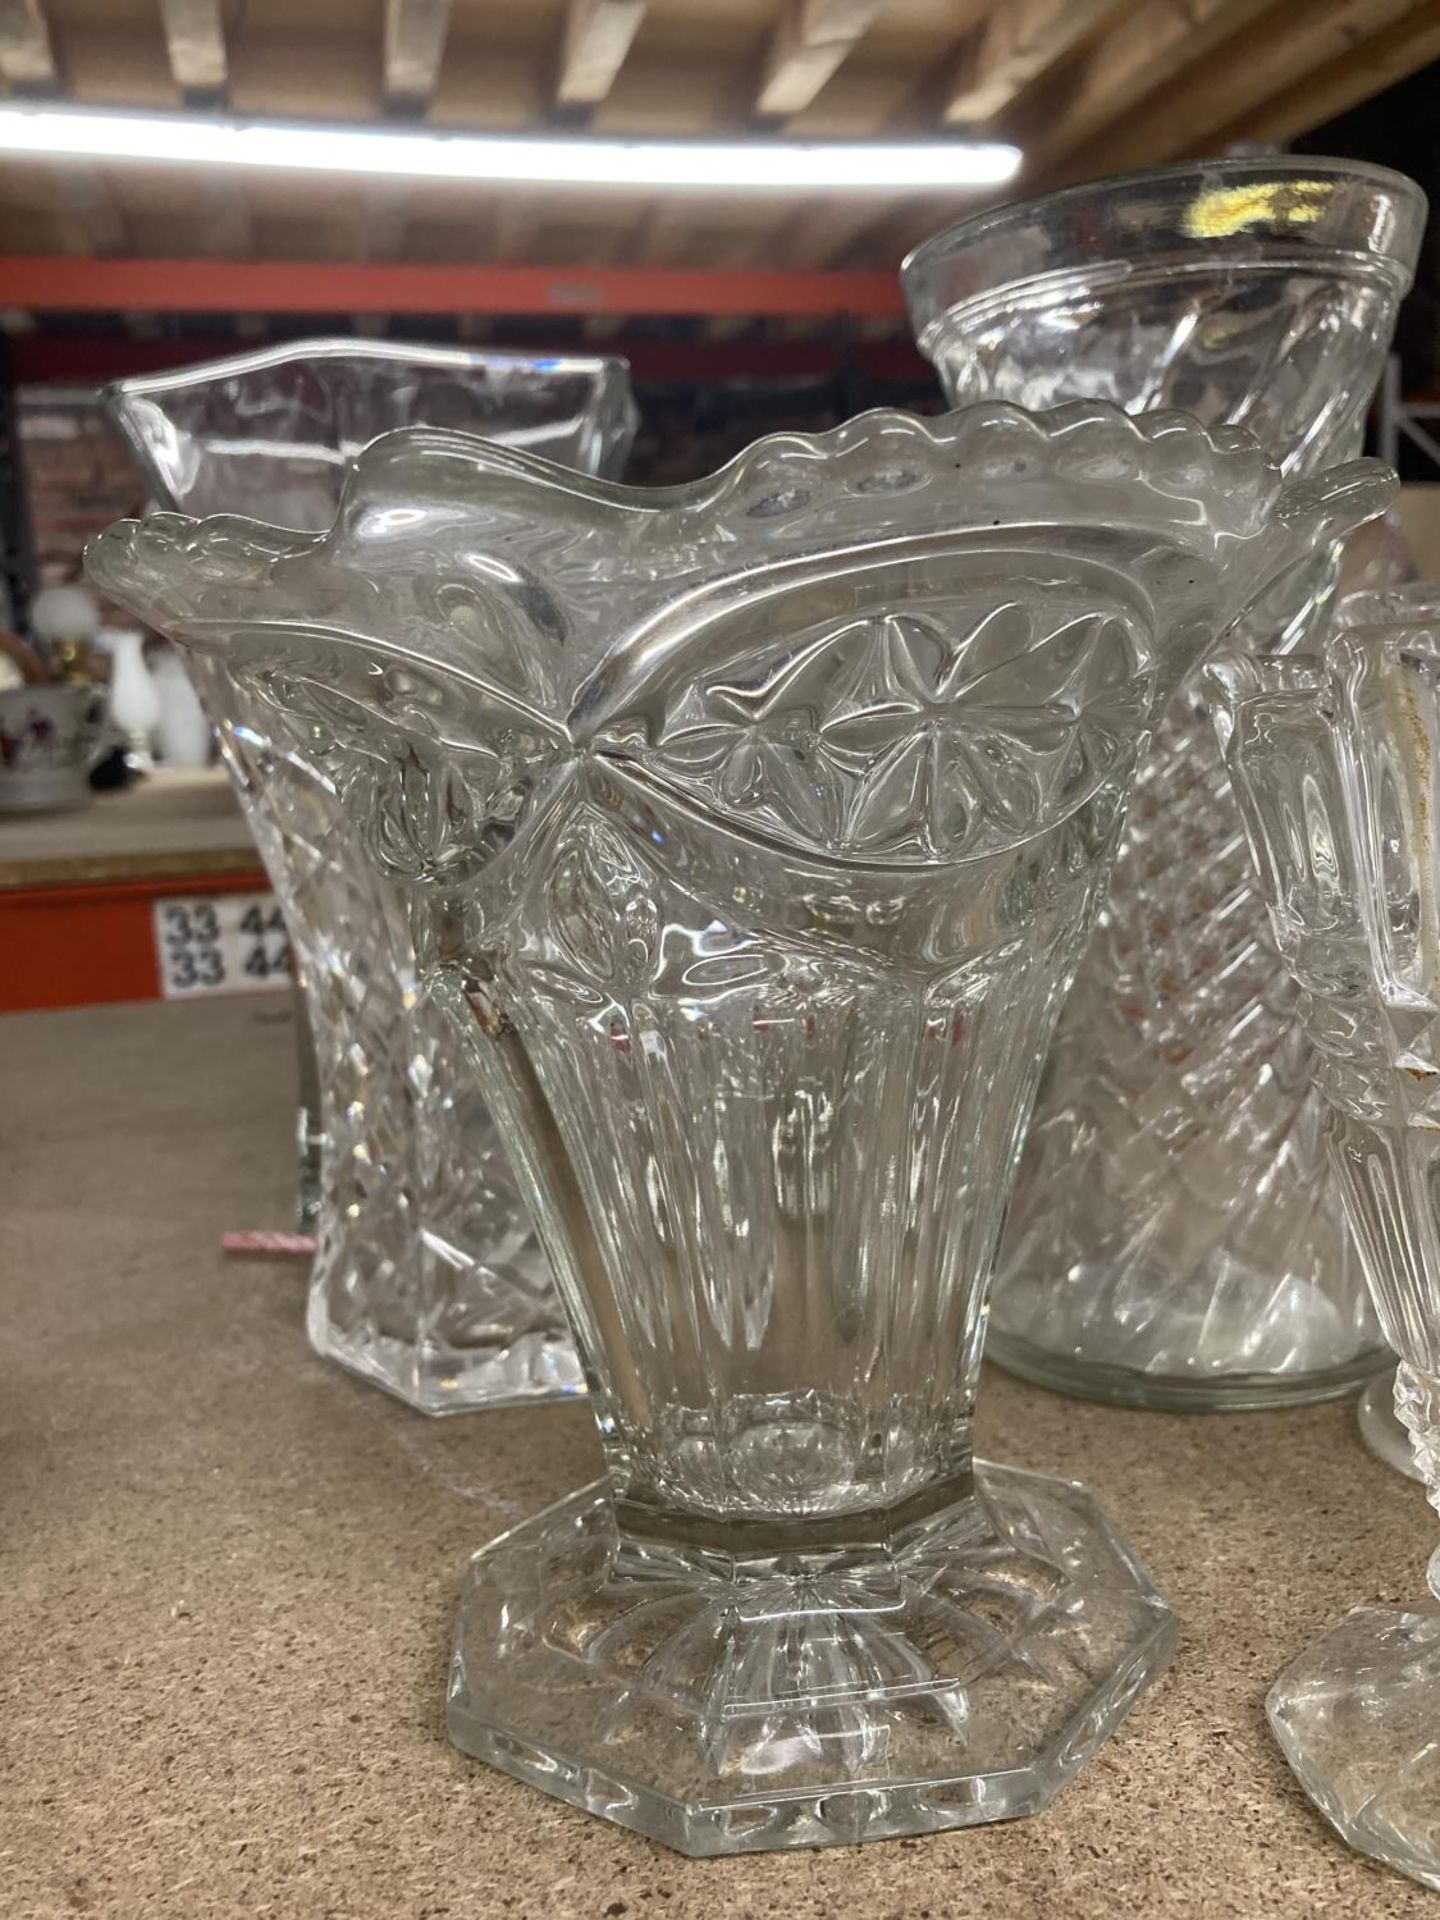 A COLLECTION OF VINTAGE GLASSWARE VASES - Image 2 of 3